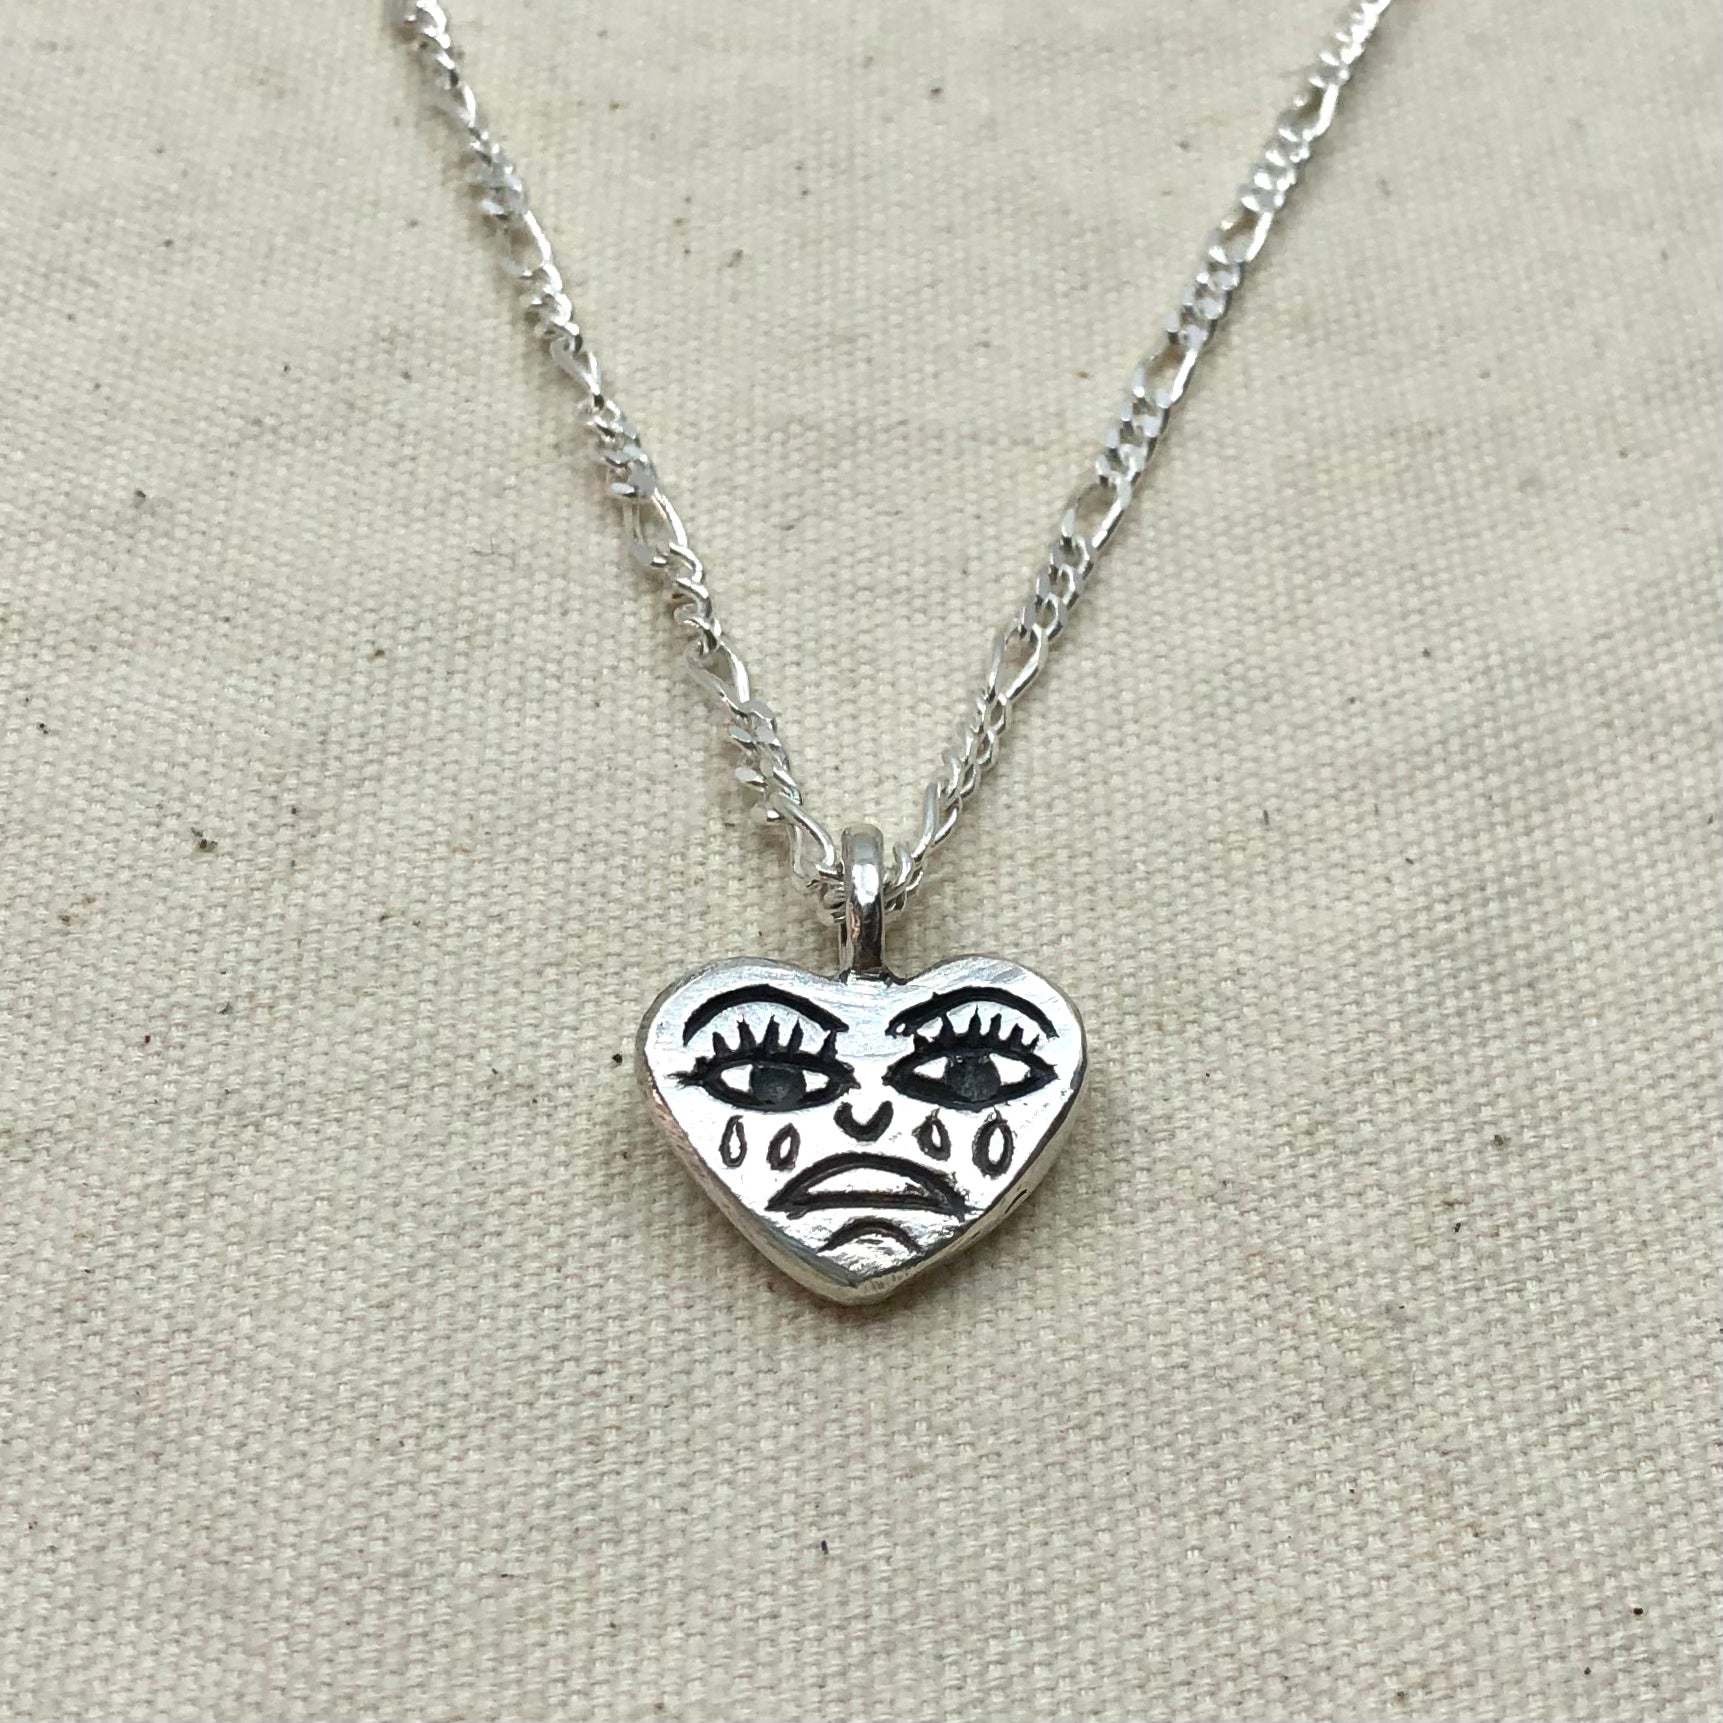 Crying Heart Necklace